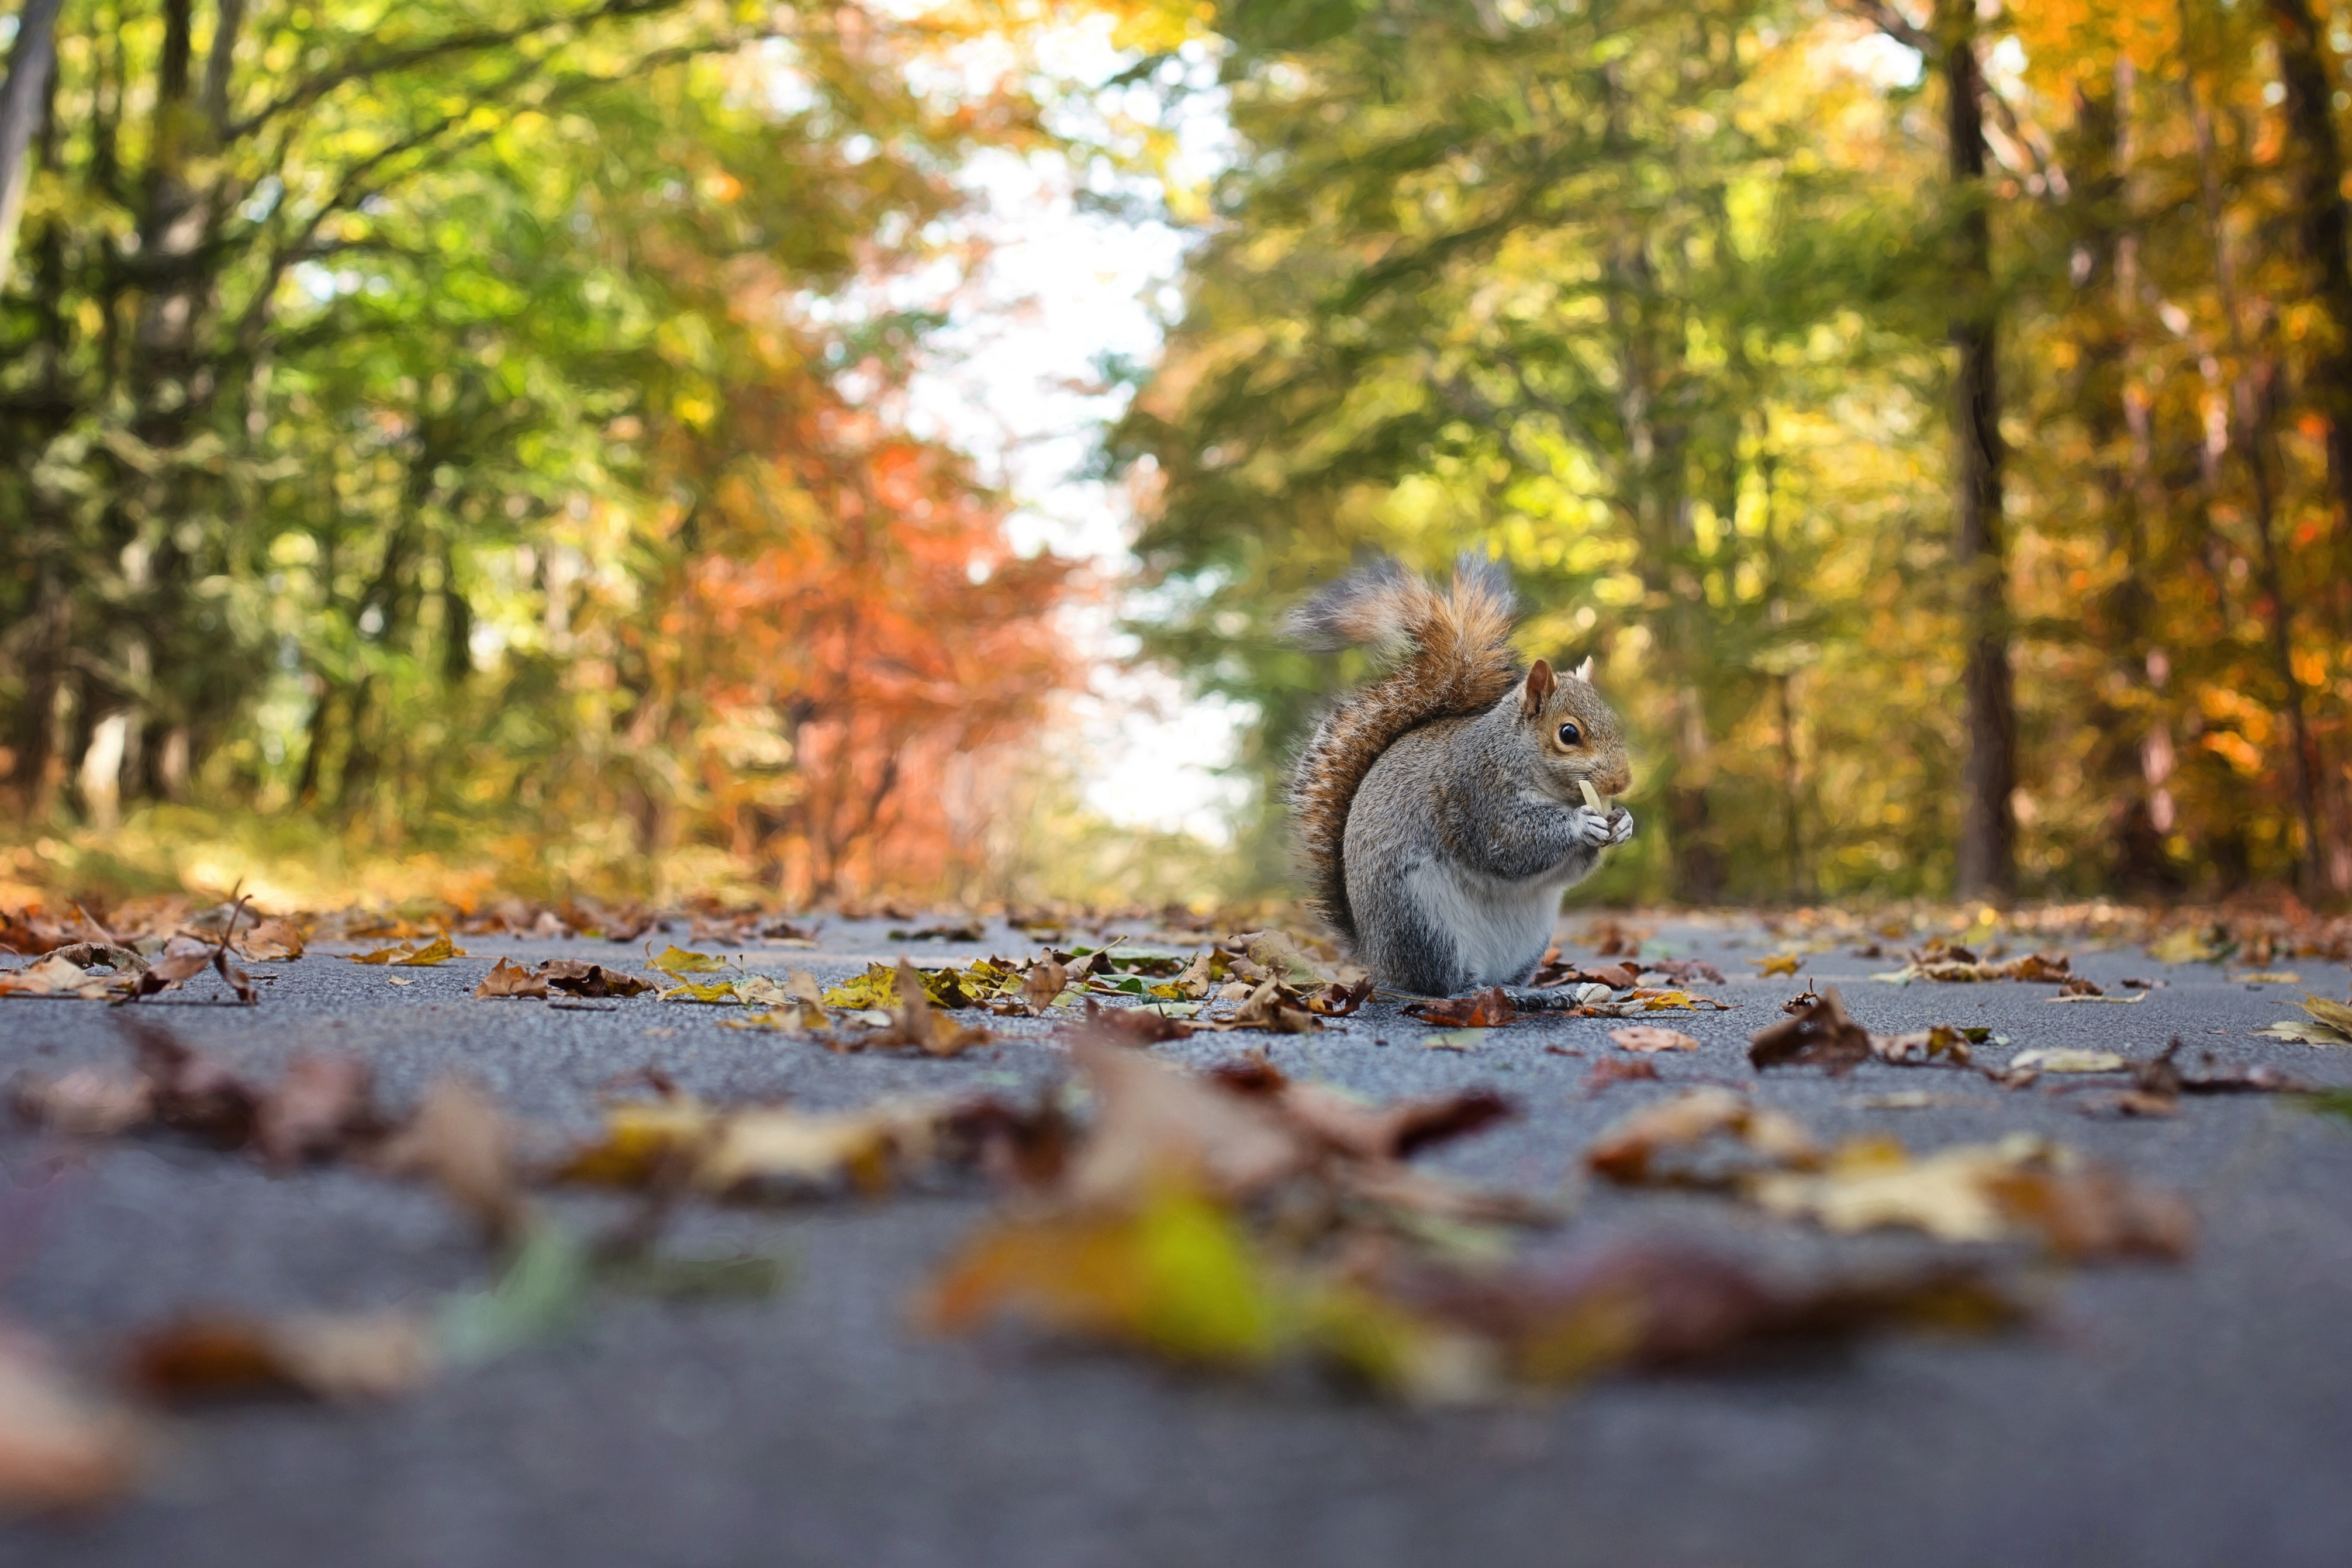 Squirrel on the road photo